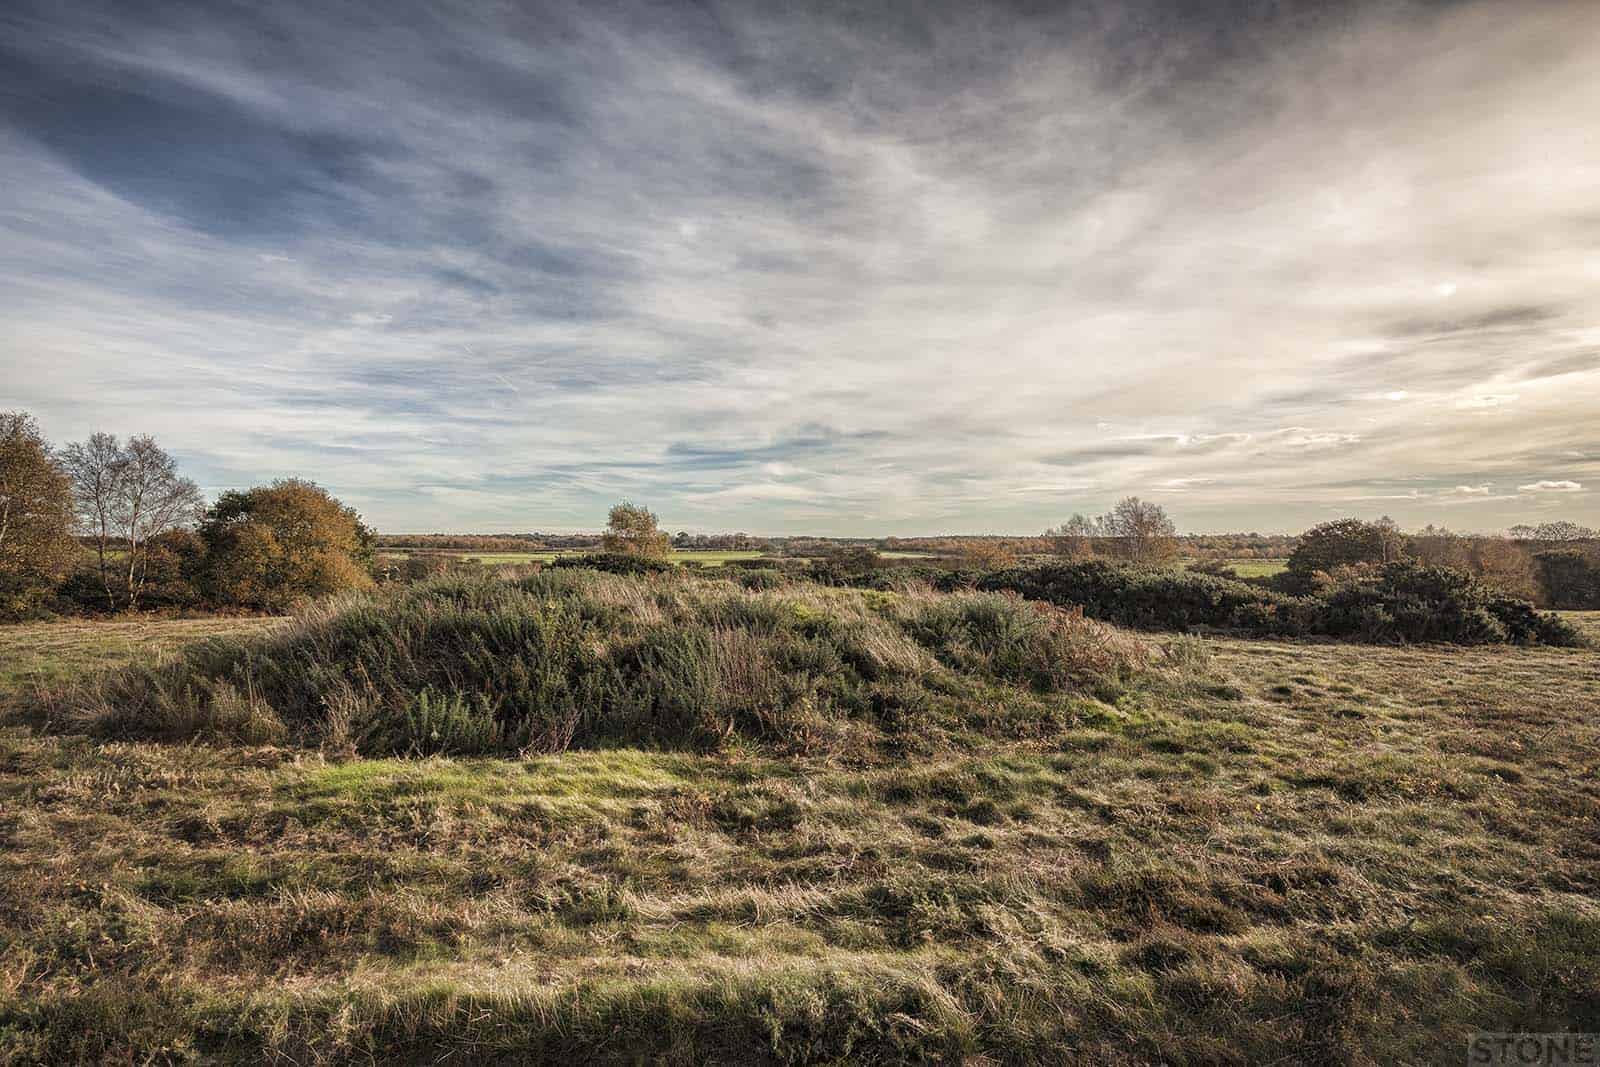 Lost in a landscape: Salthouse, touching the past